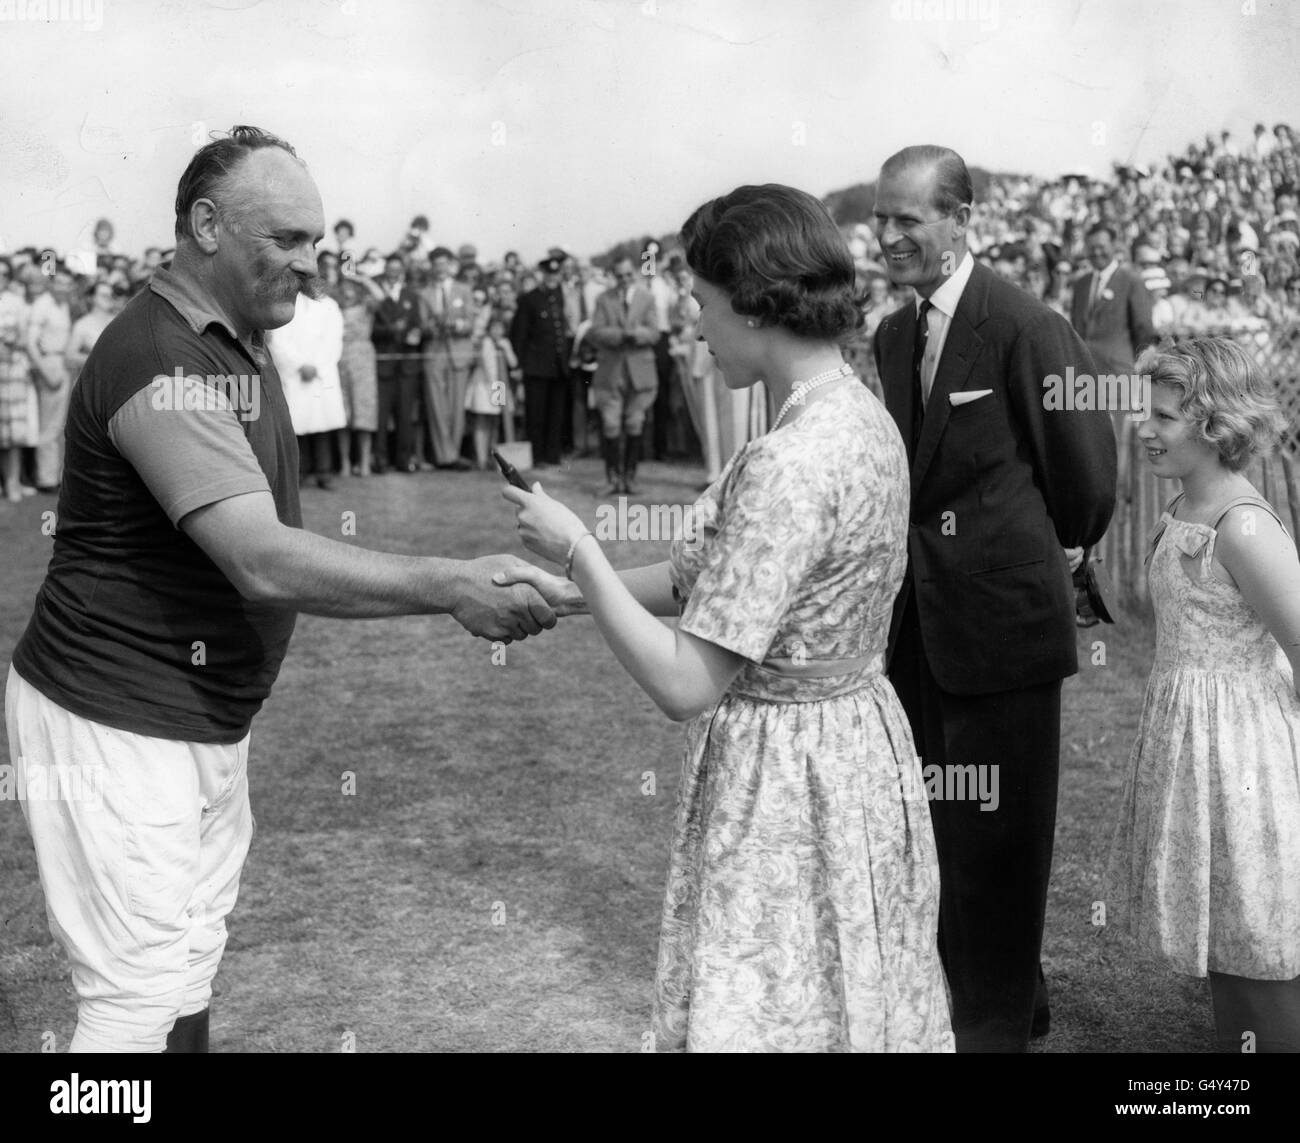 **Low-res scanned off print** Queen Elizabeth II presents a three coloured pencil to comedian Jimmy Edwards, as a consolation prize after his team, Ambersham, has been defeated by Jersey Lillies at polo on Smith's Lawn, Windsor Great Park. The Duke of Edinburgh and Princess Anne look on in amusement. Stock Photo